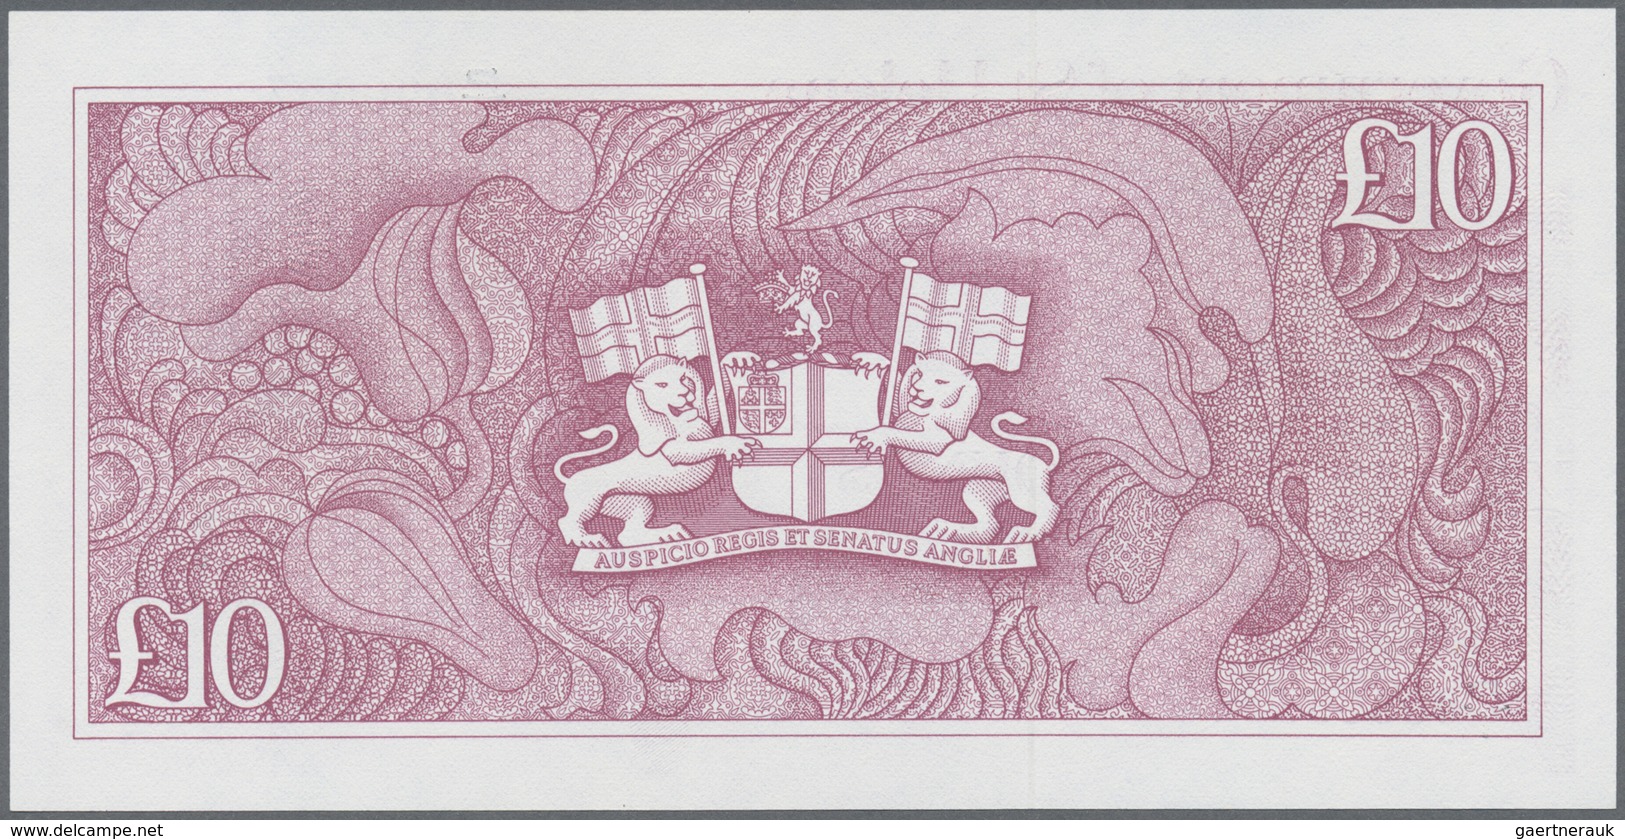 St. Helena: Set with 4 Banknotes with Matching First Prefix Low Serial Number 50 Pence, 1 Pound, 5 P